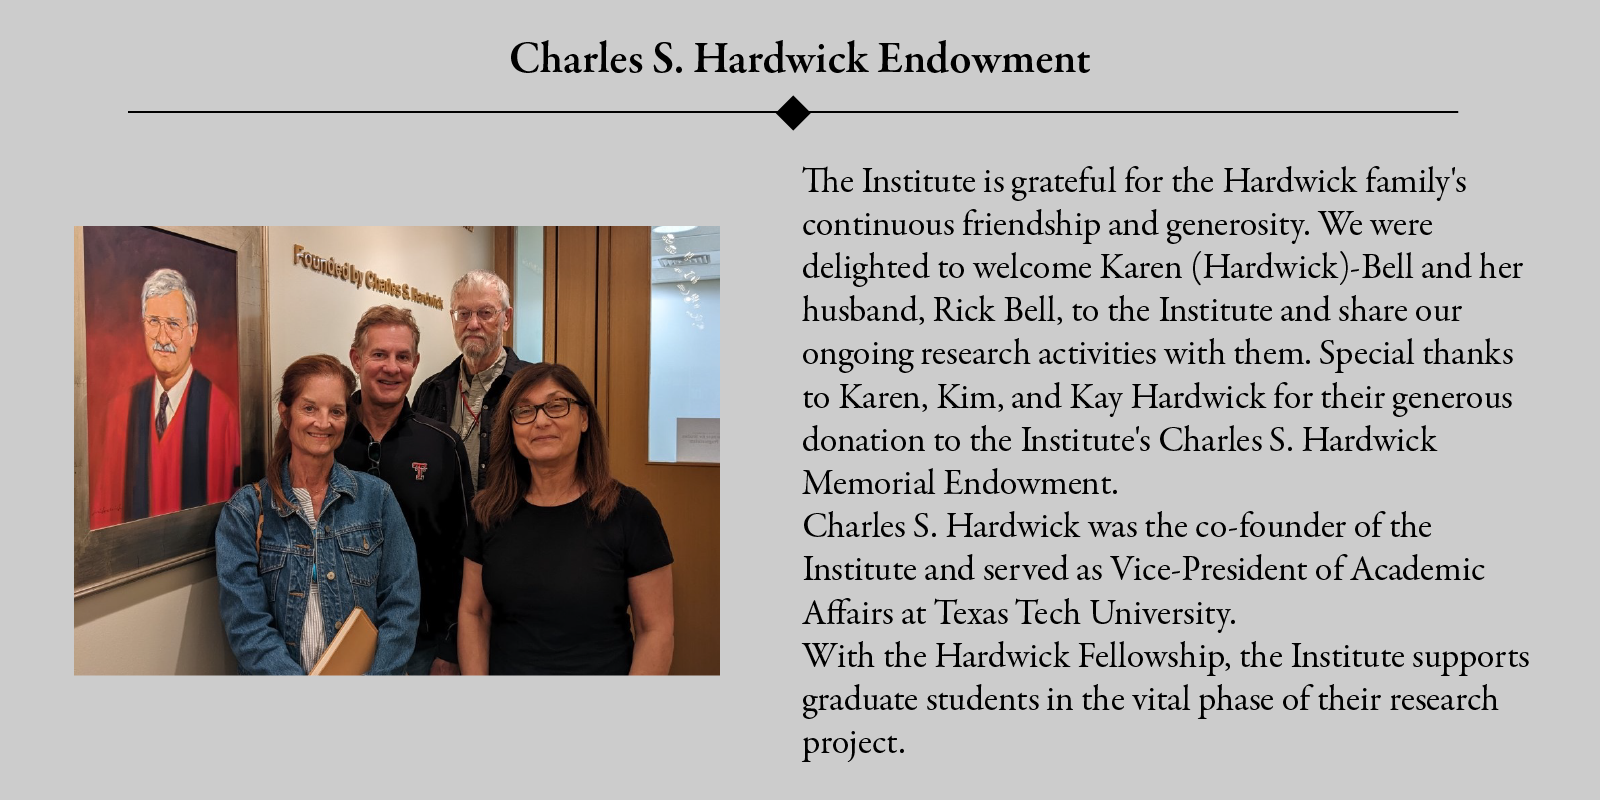 Charles S. Hardwick Endowment: The Institute is grateful for the Hardwick family's continuous friendship and generosity. We were delighted to welcome Karen (Hardwick)-Bell and her husband, Rick Bell, to the Institute and share our ongoing research activities with them. Special thanks to Karen, Kam, and Kay Hardwick for their generous donation to the Institute's Charles S. Hardwick Memorial Endowment.Charles S. Hardwick was the co-founder of the Institute and served as Vice-President of Academic Affairs at Texas Tech University. With the Hardwick Fellowship, the Institute supports graduate students in the vital phase of their research project.